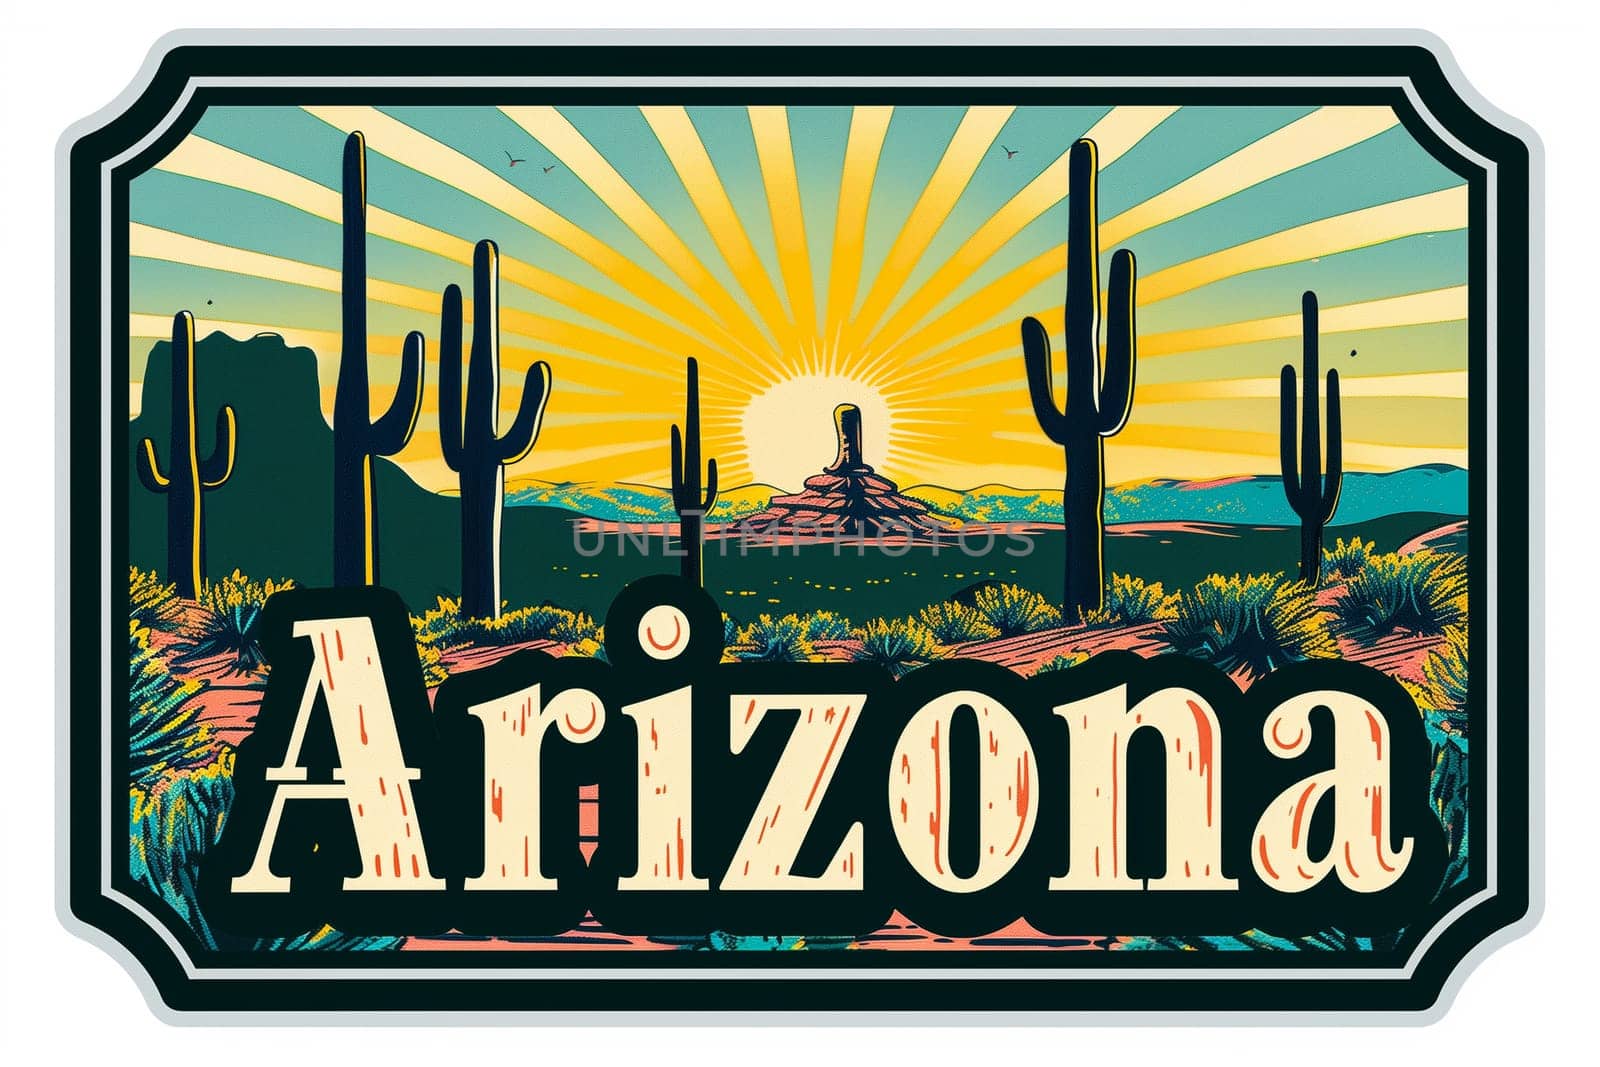 A sign displaying Arizona with a desert landscape in the background under a clear sky.